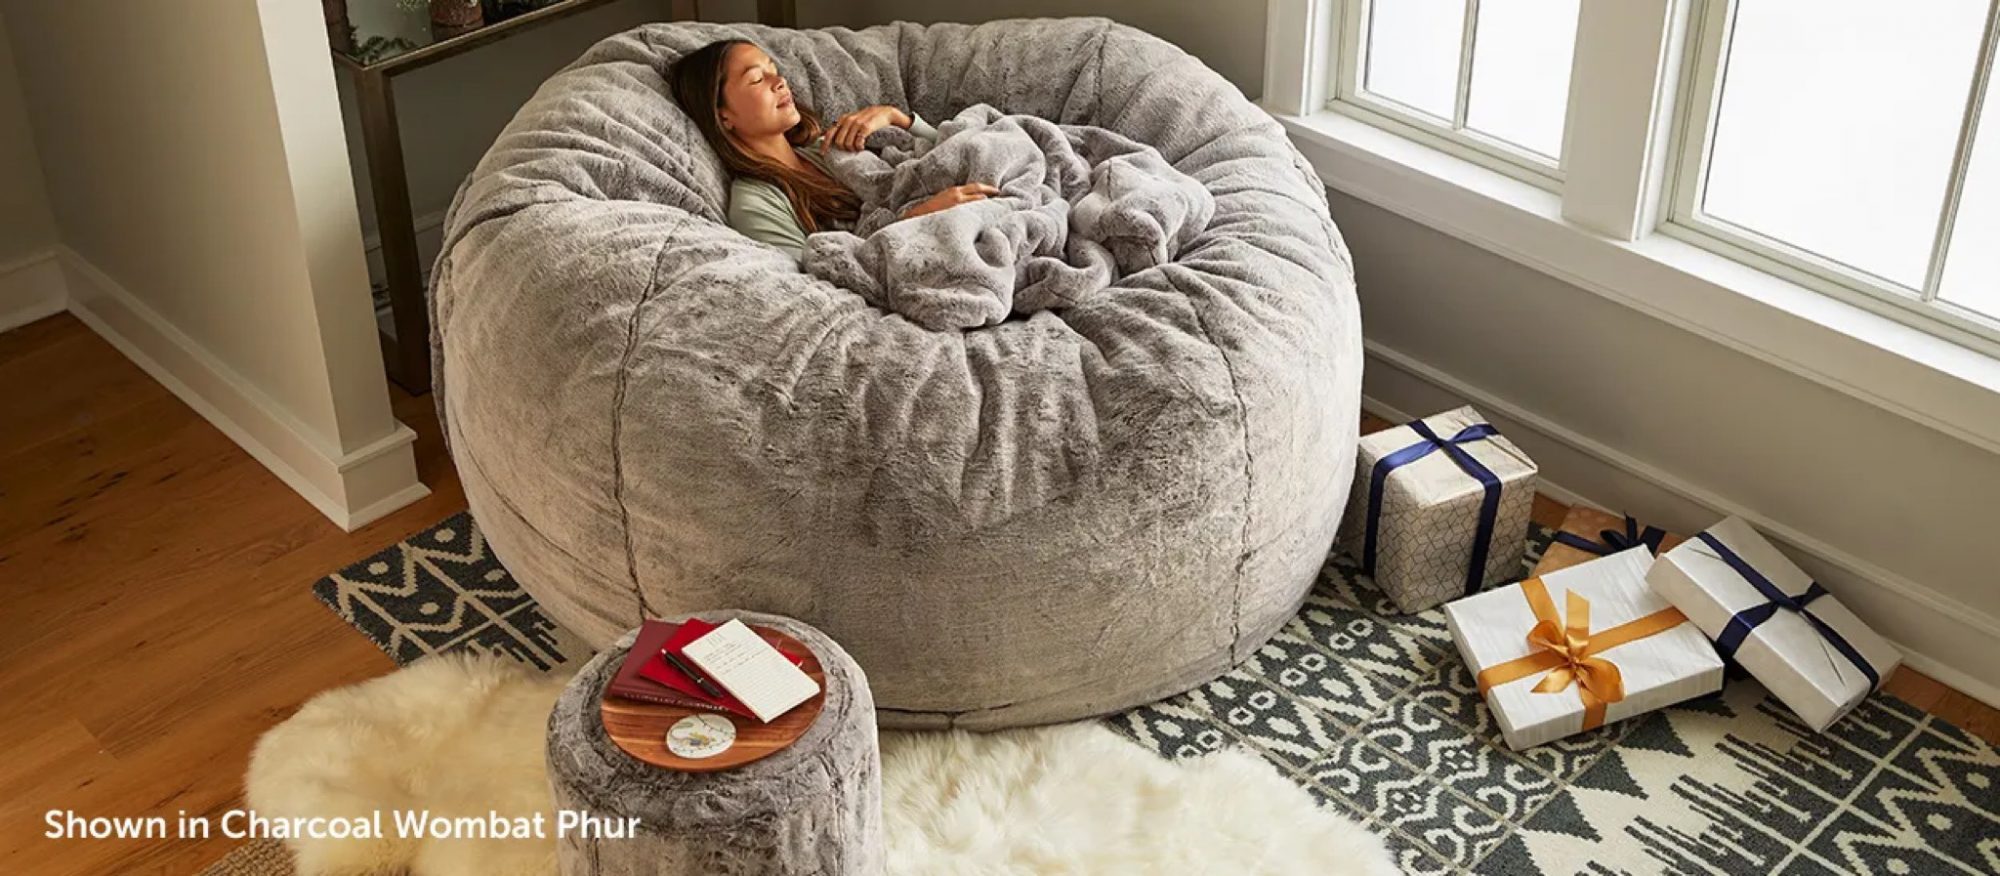 LOVESAC, A Furniture Company Known For Its Foamfilled “Lovesac” And